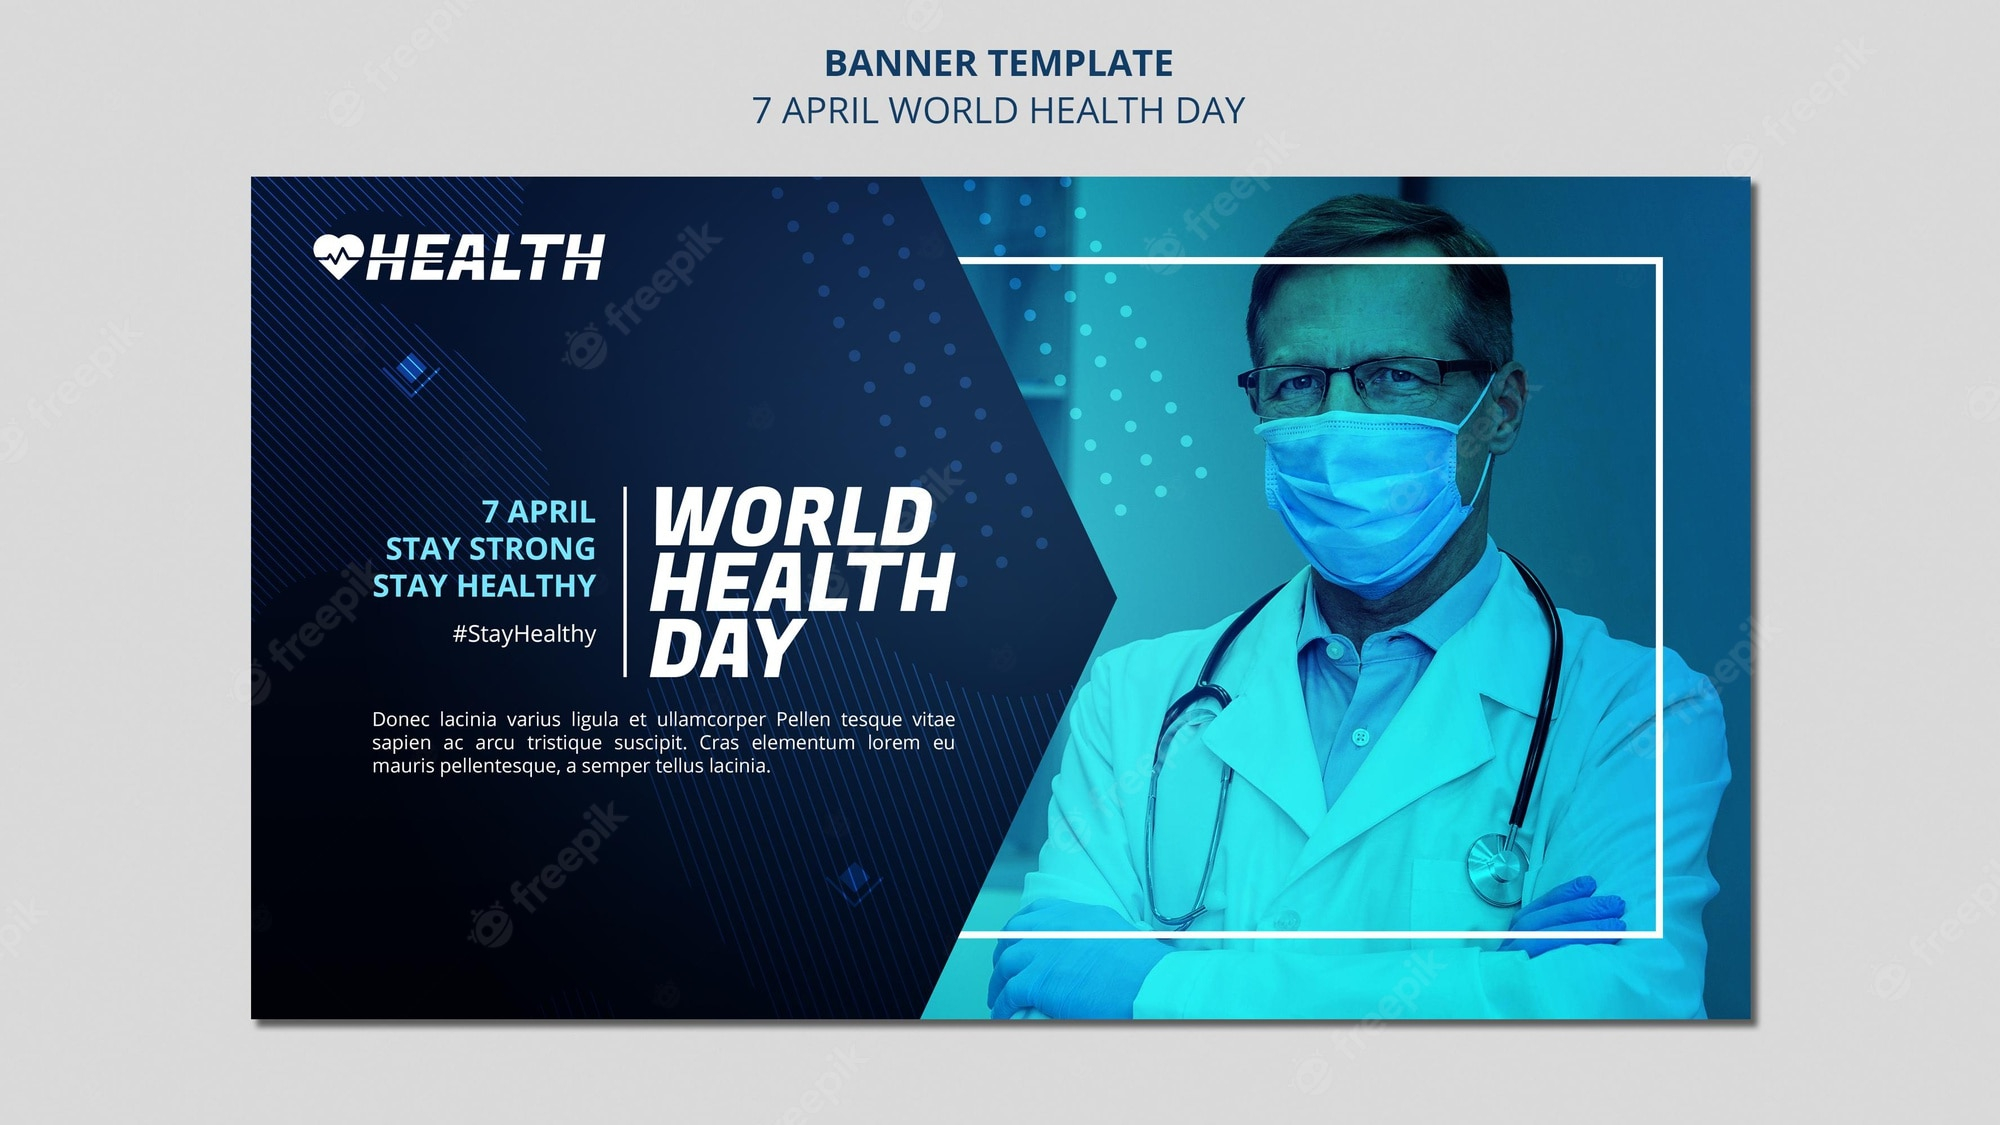 Event Banner Images  Free Vectors, Stock Photos & PSD Within Event Banner Template